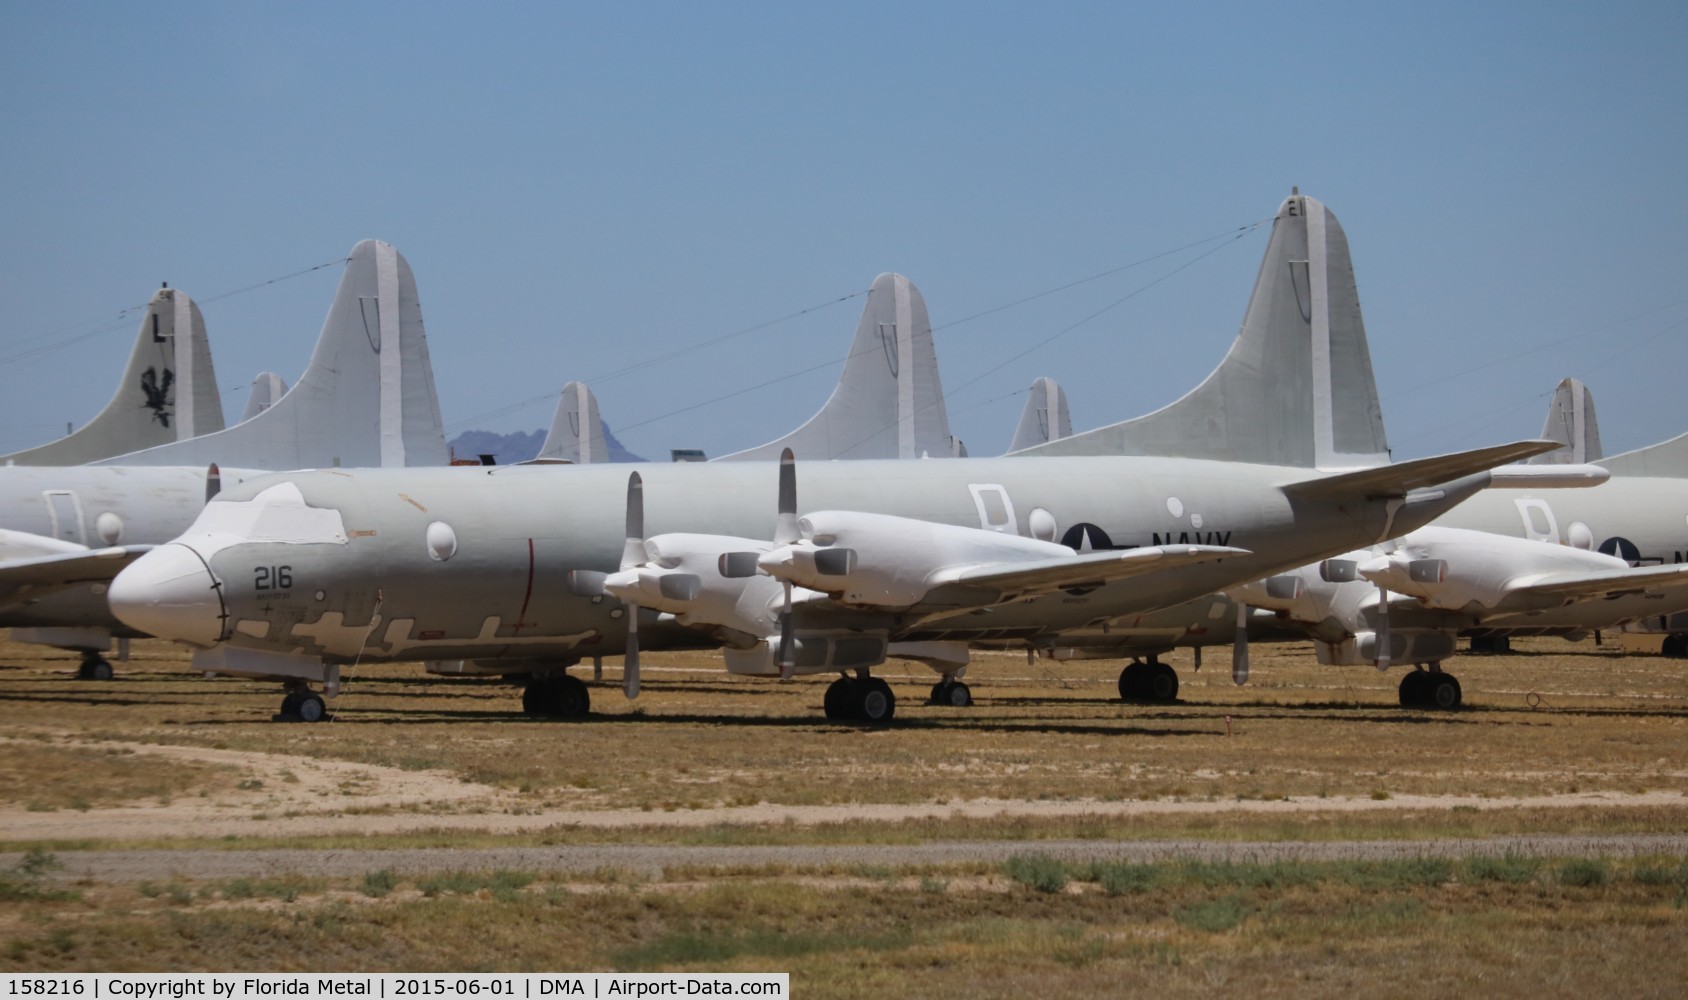 158216, Lockheed P-3C Orion C/N 285A-5561, P-3C Orion